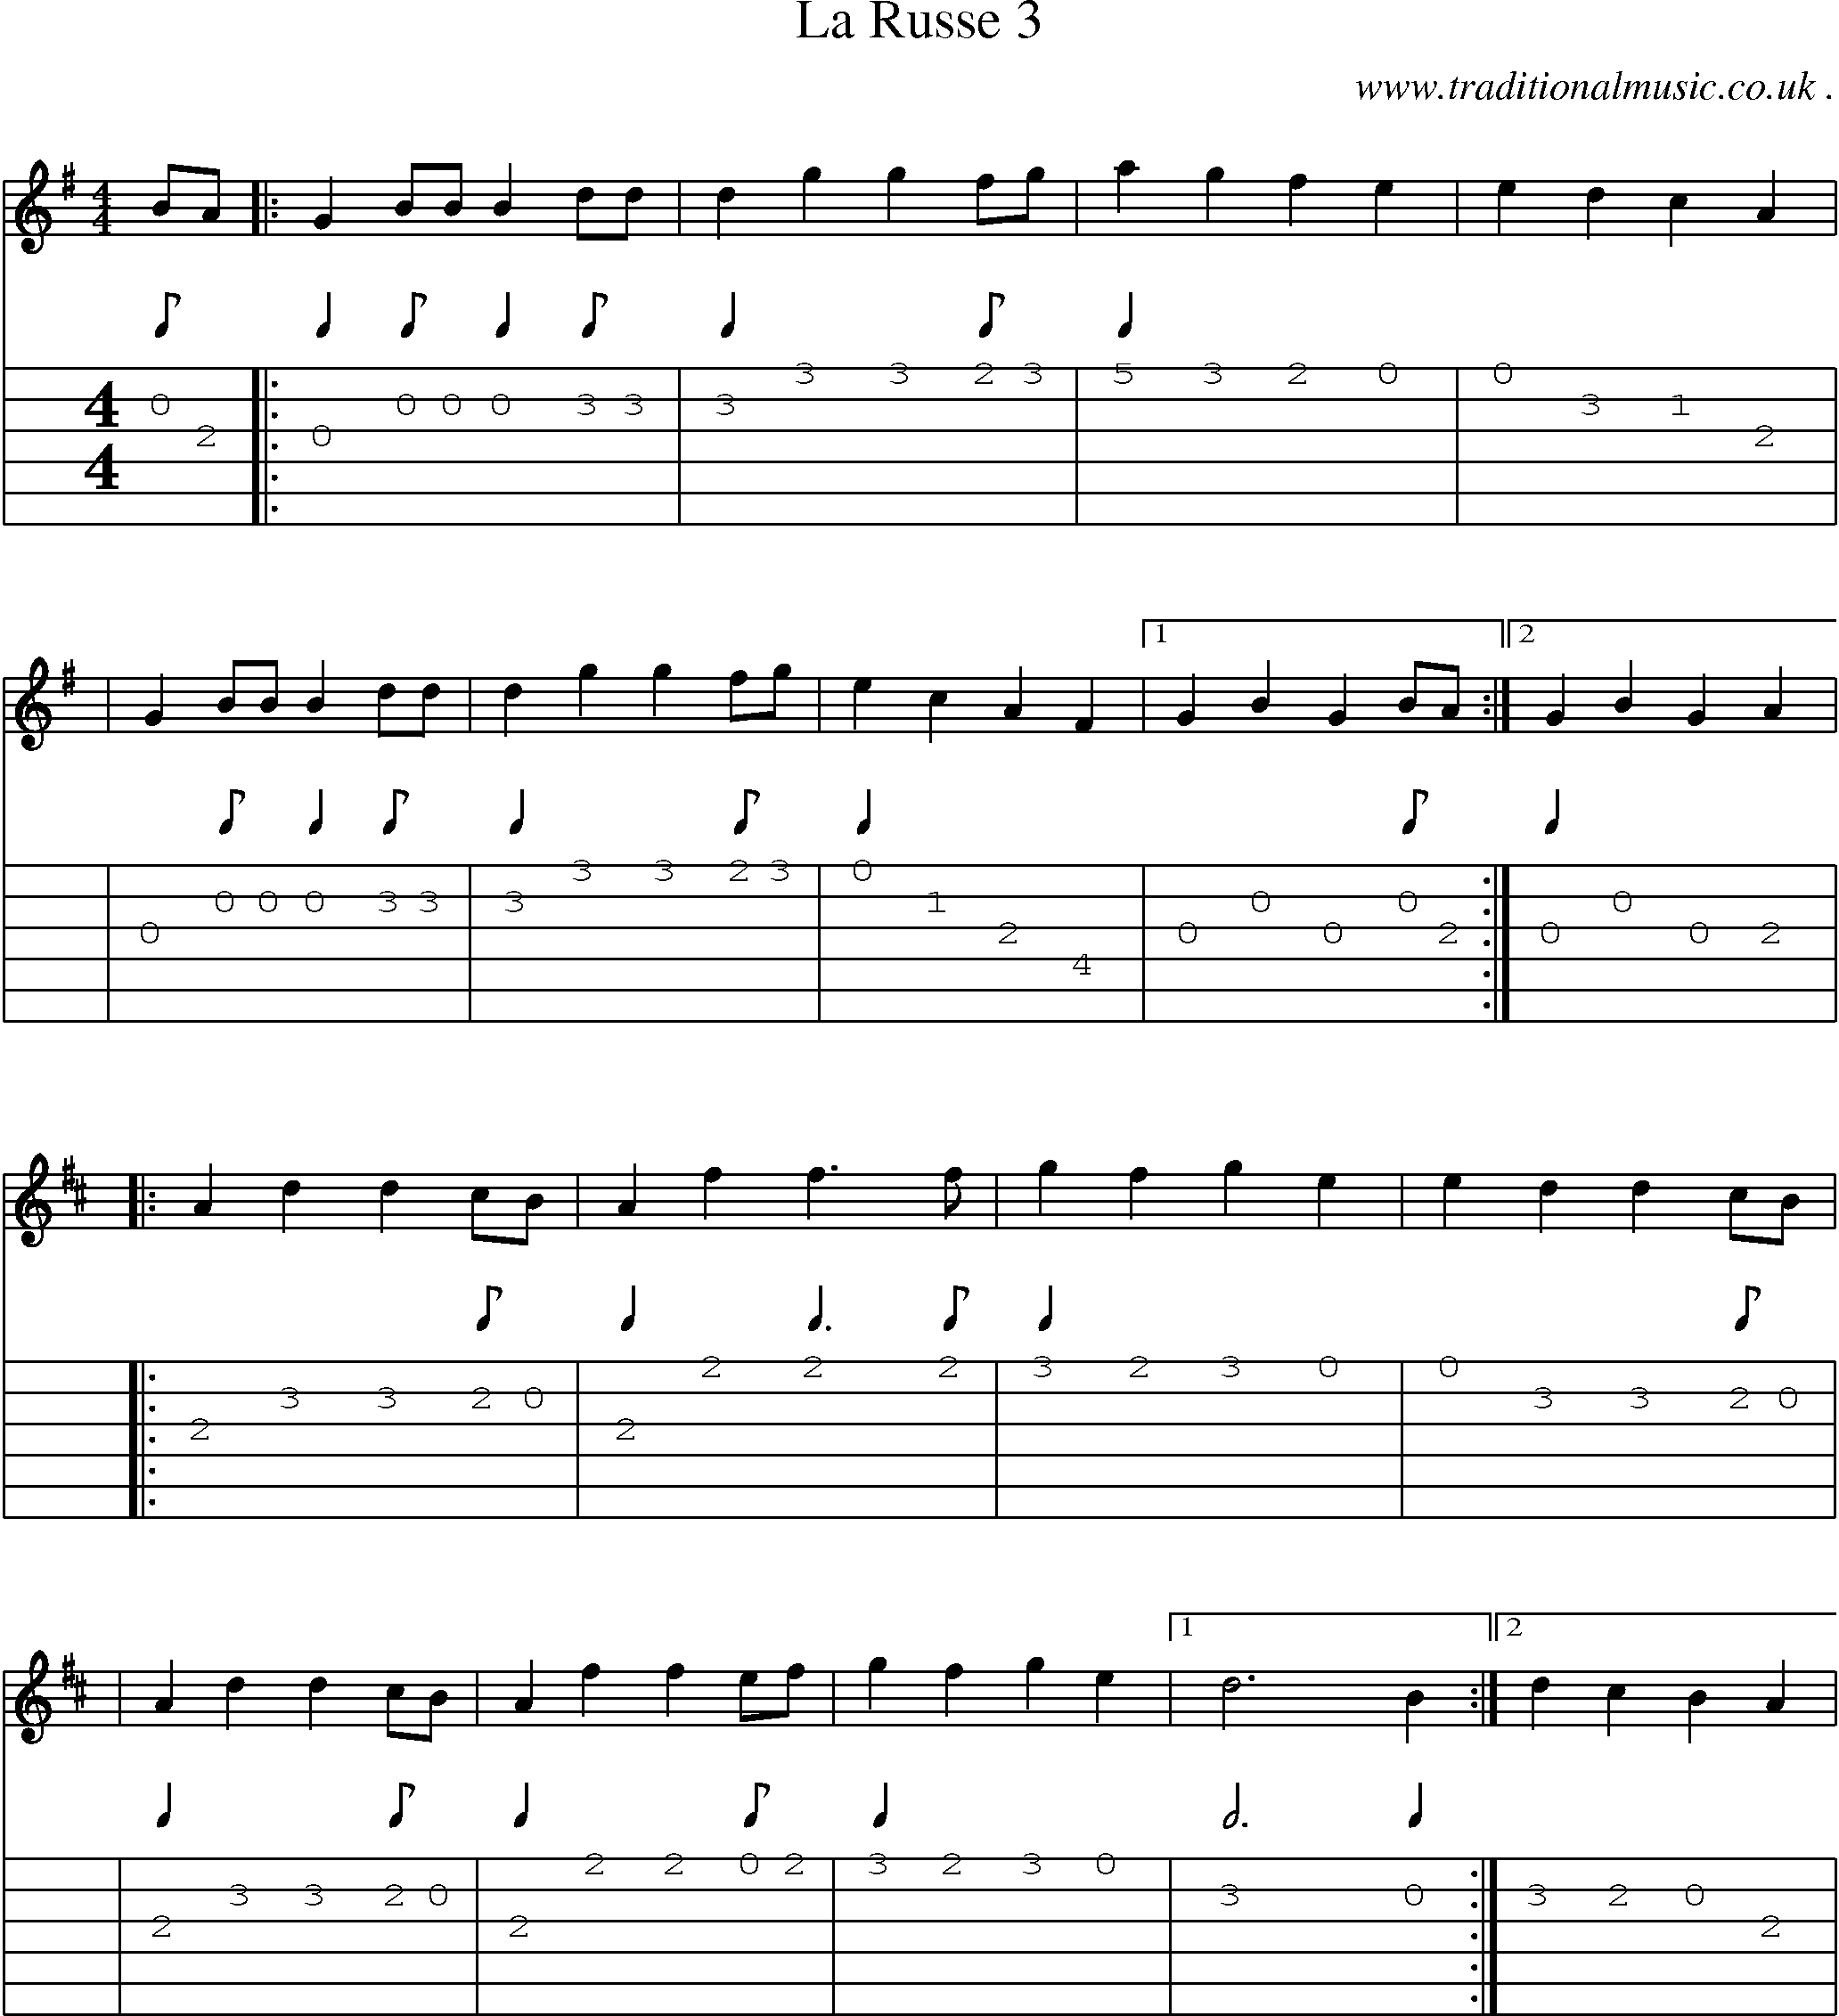 Sheet-Music and Guitar Tabs for La Russe 3